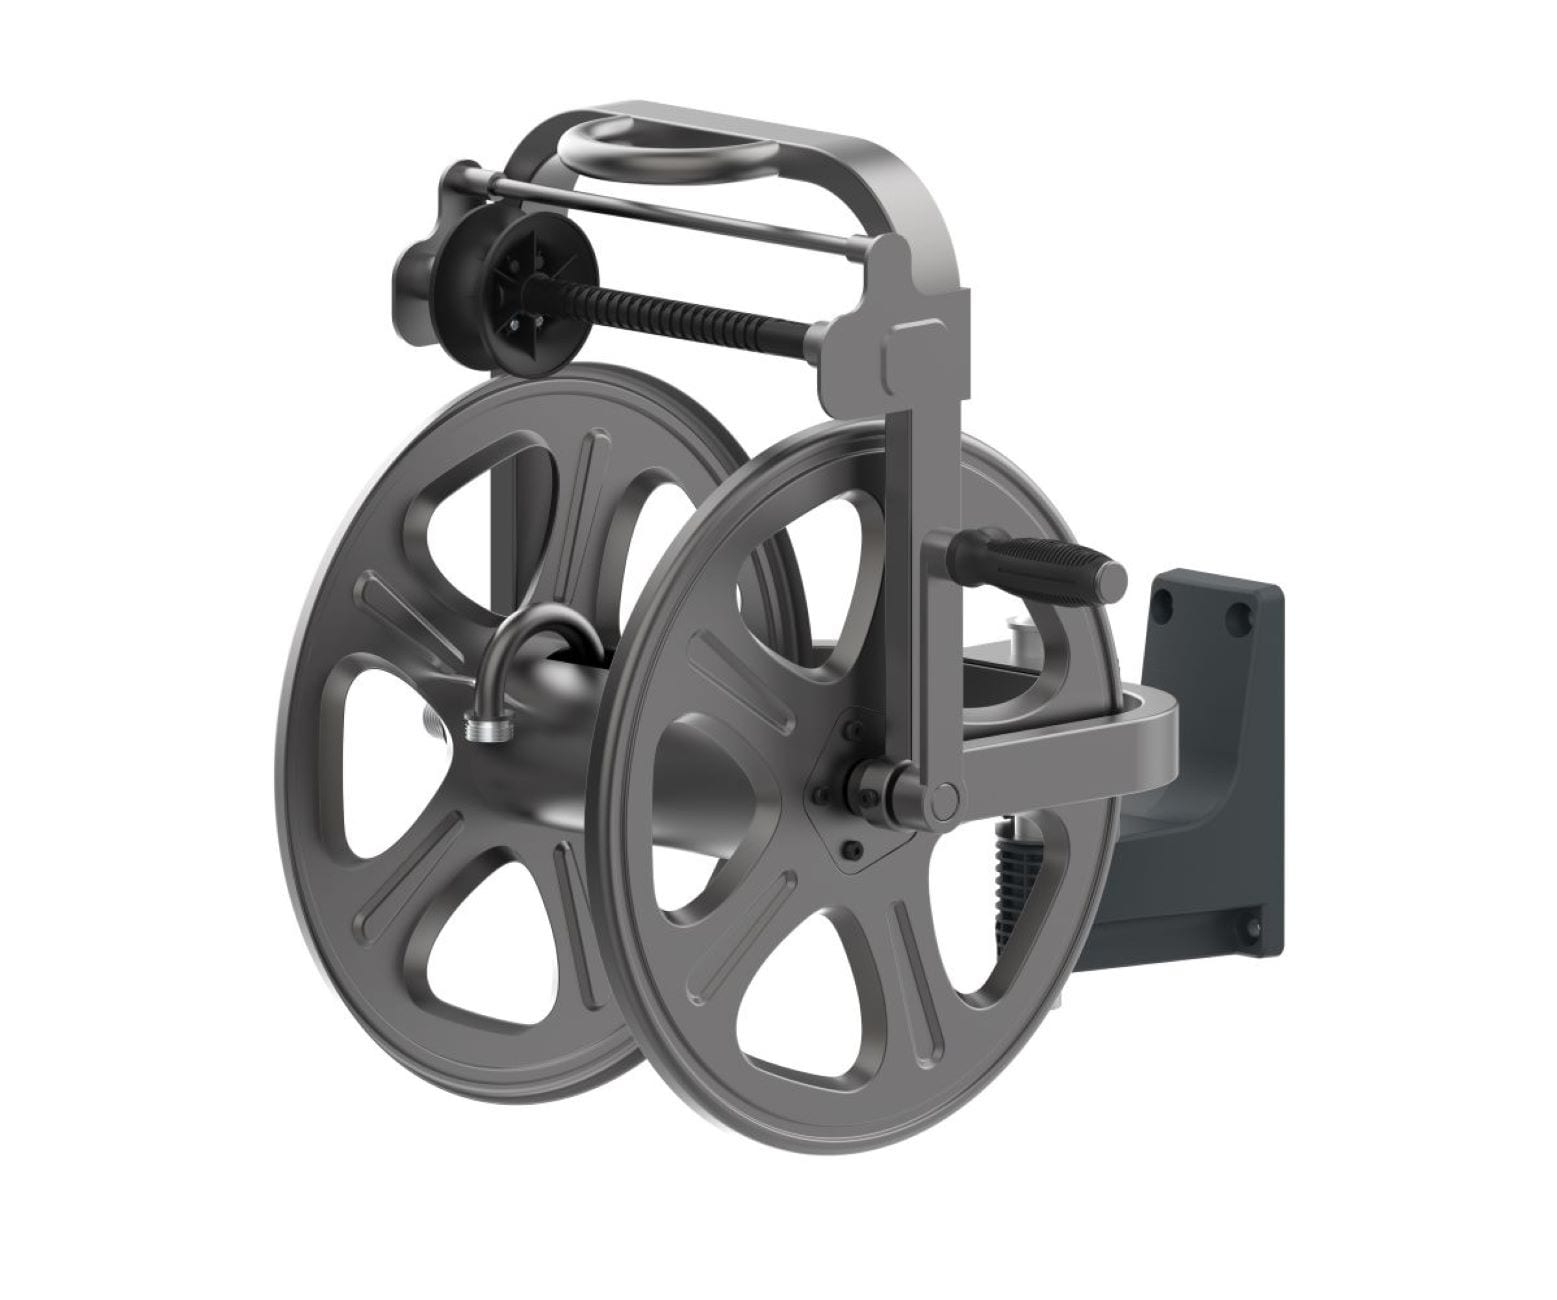 Sunneday The wall mounted hose reel will hold up to 125 ft. of